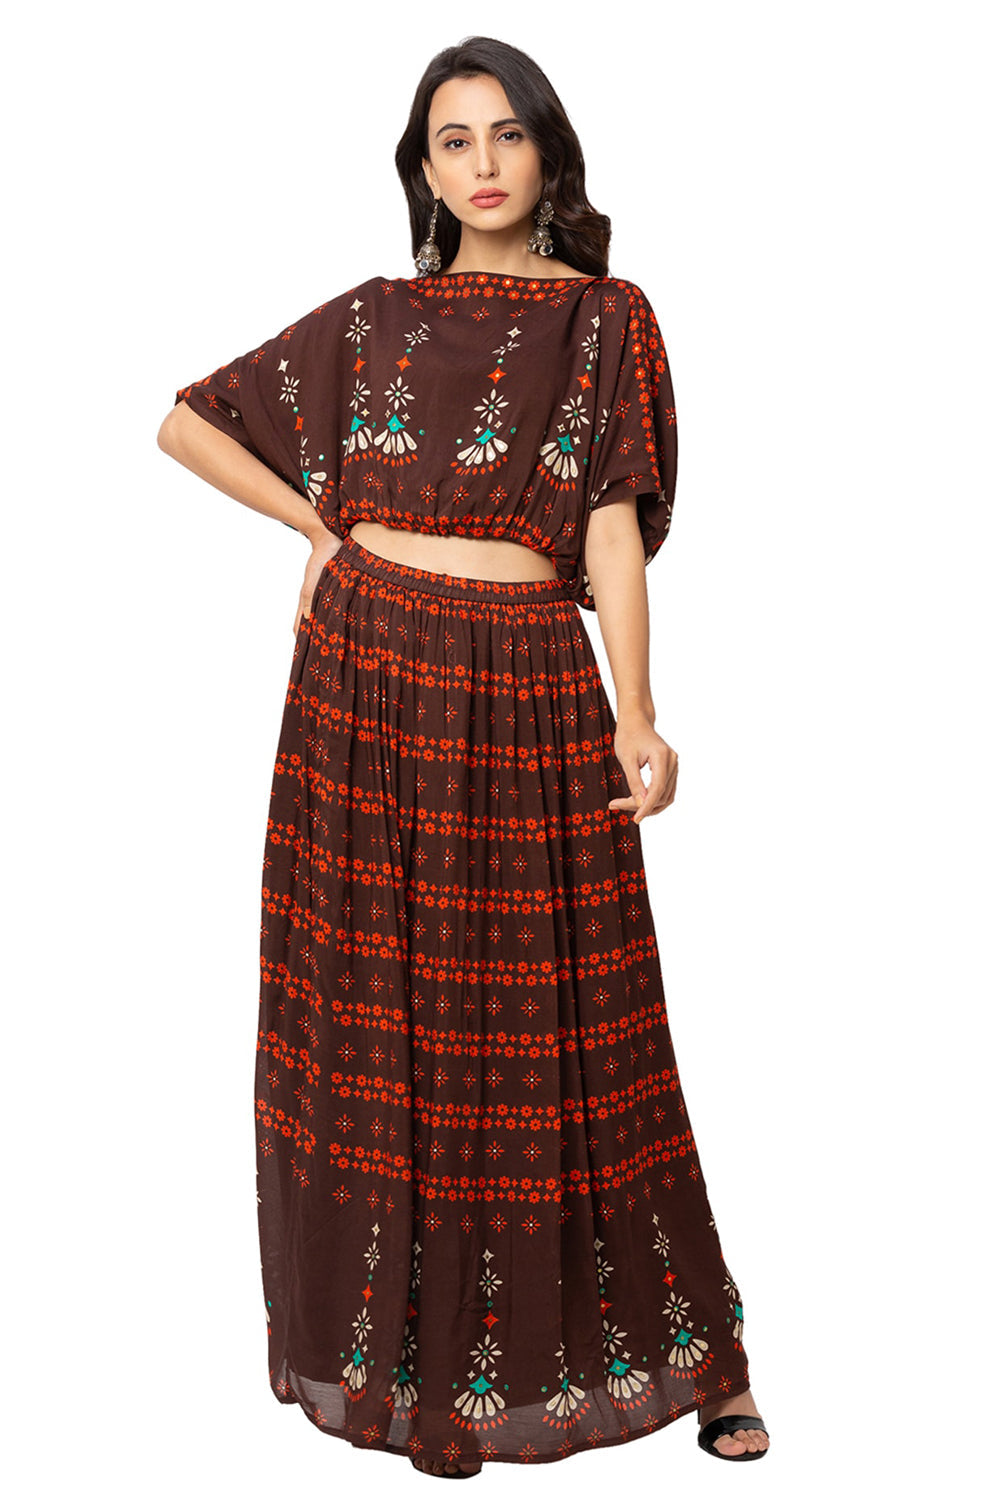 Printed Crop Top With Flared Skirt